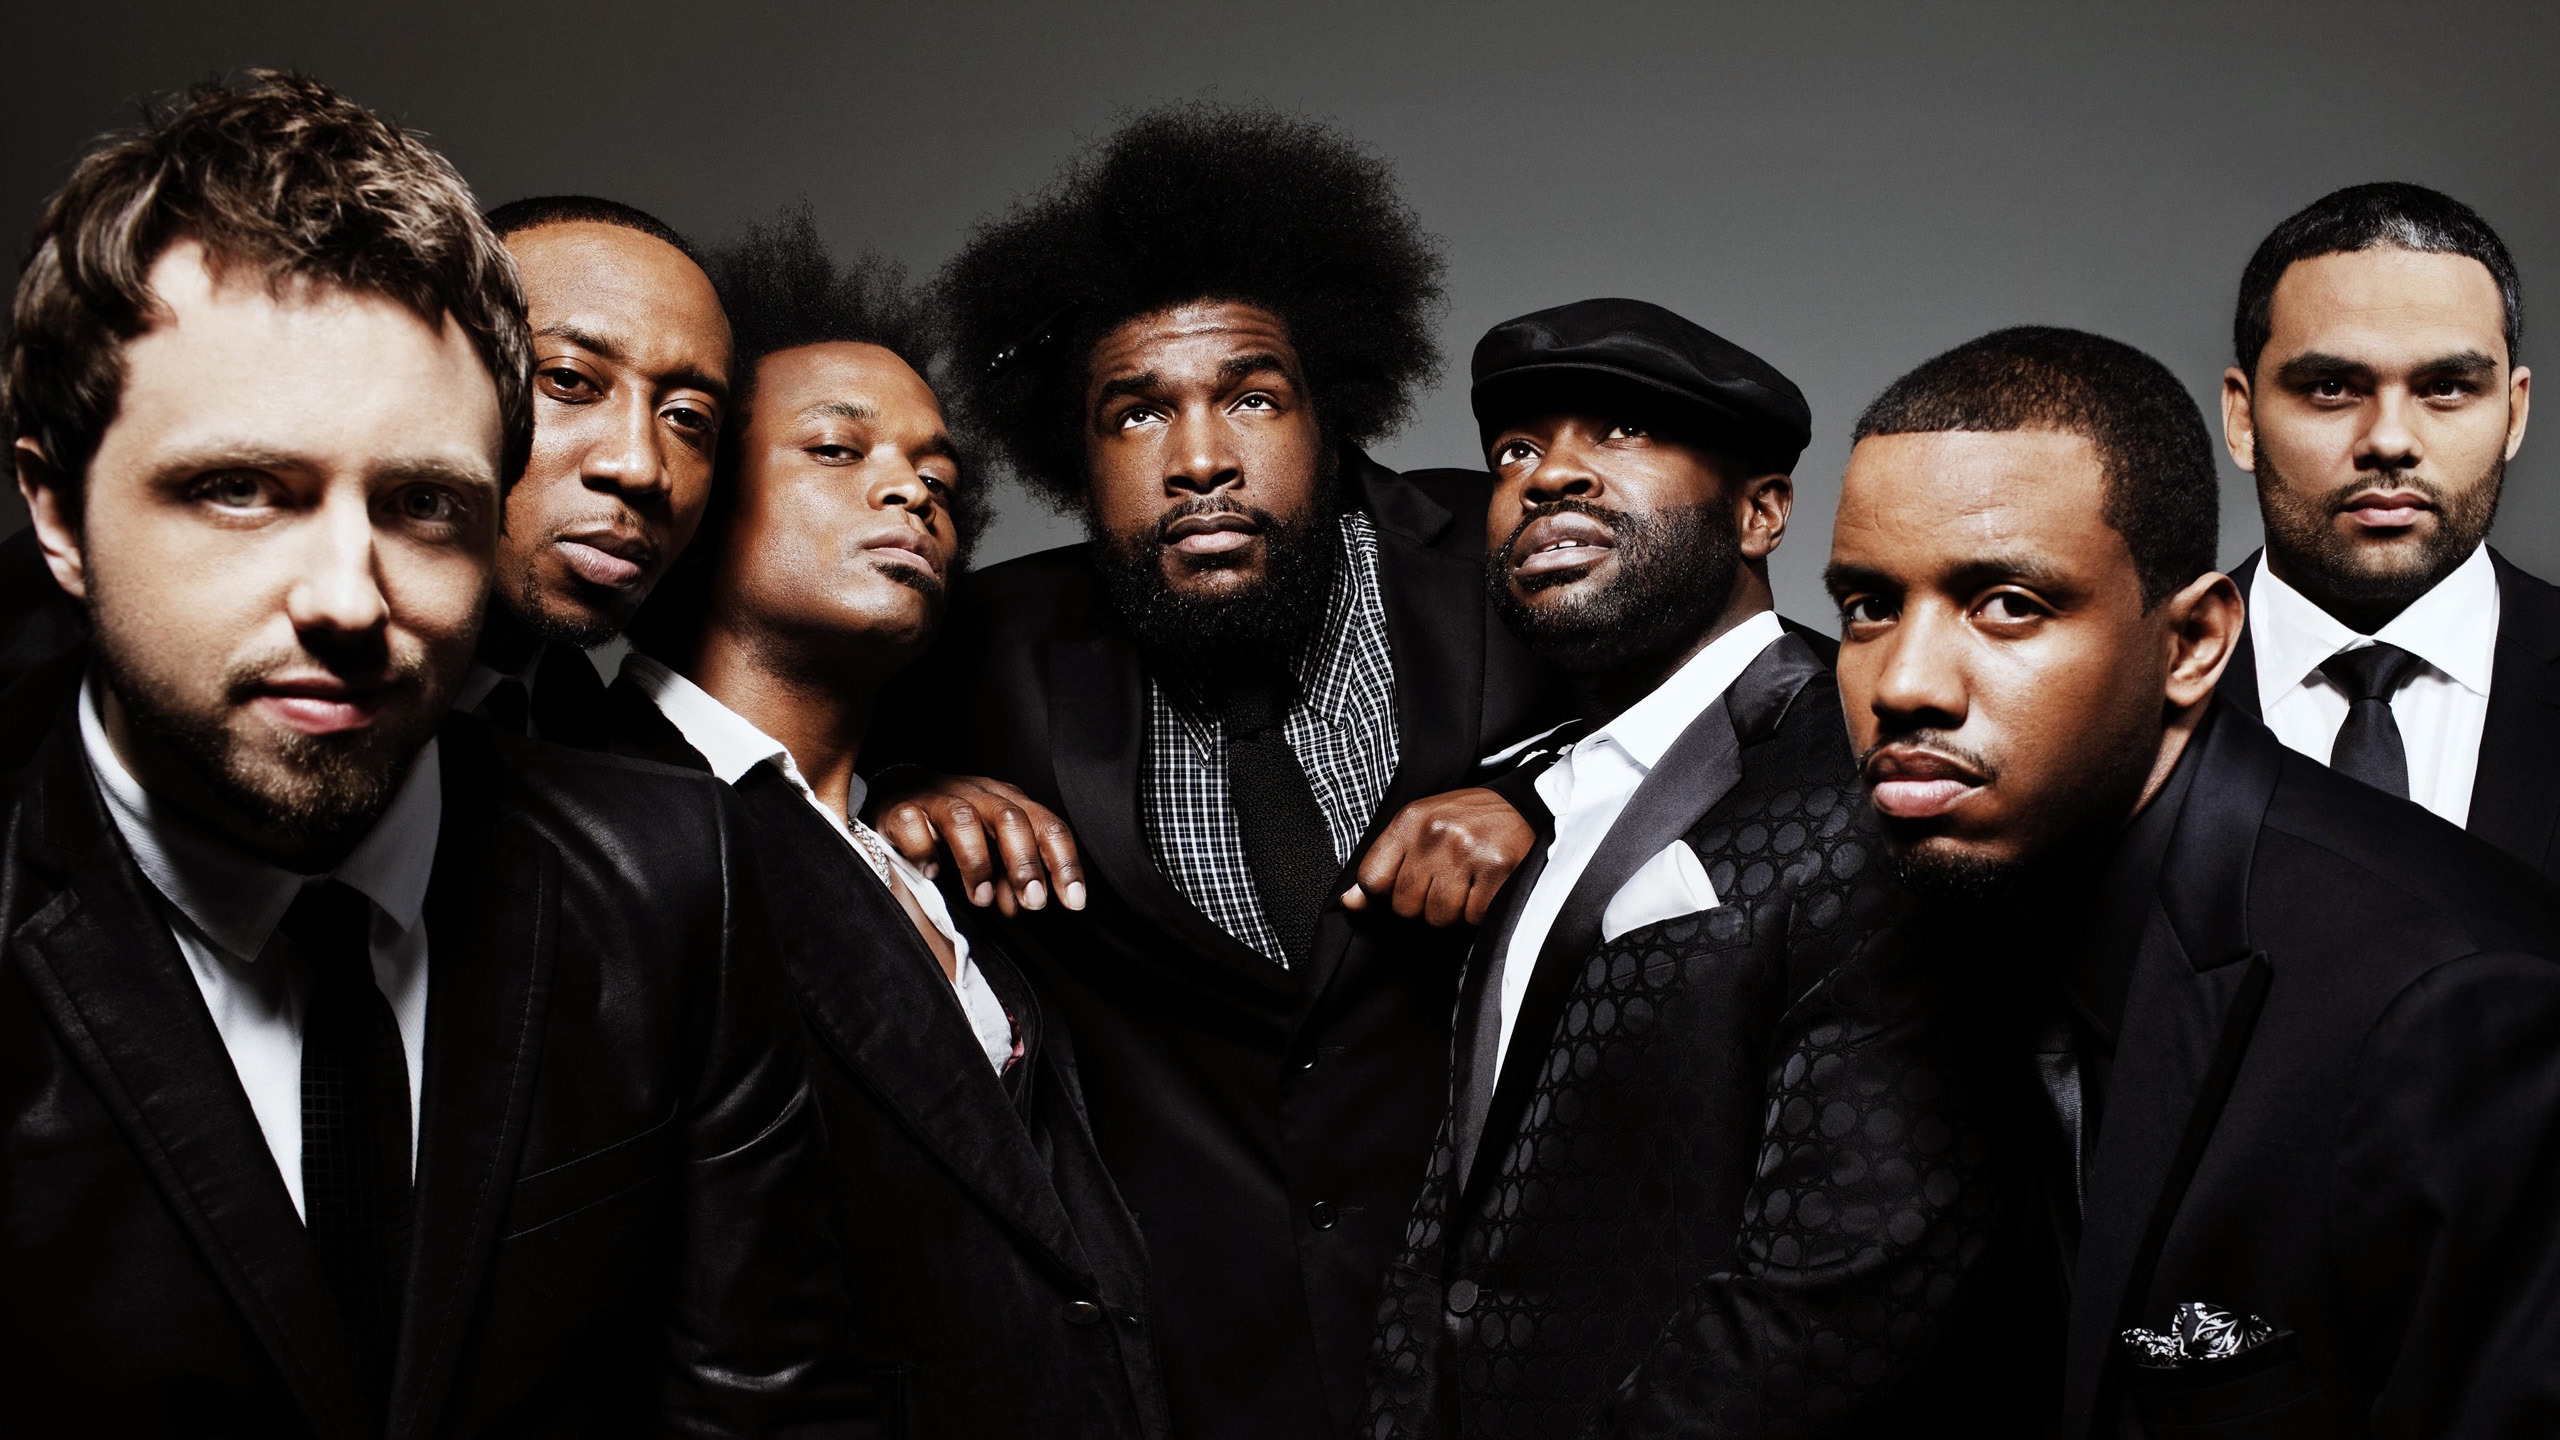 The Roots Band Photo Session for 2560x1440 HDTV resolution